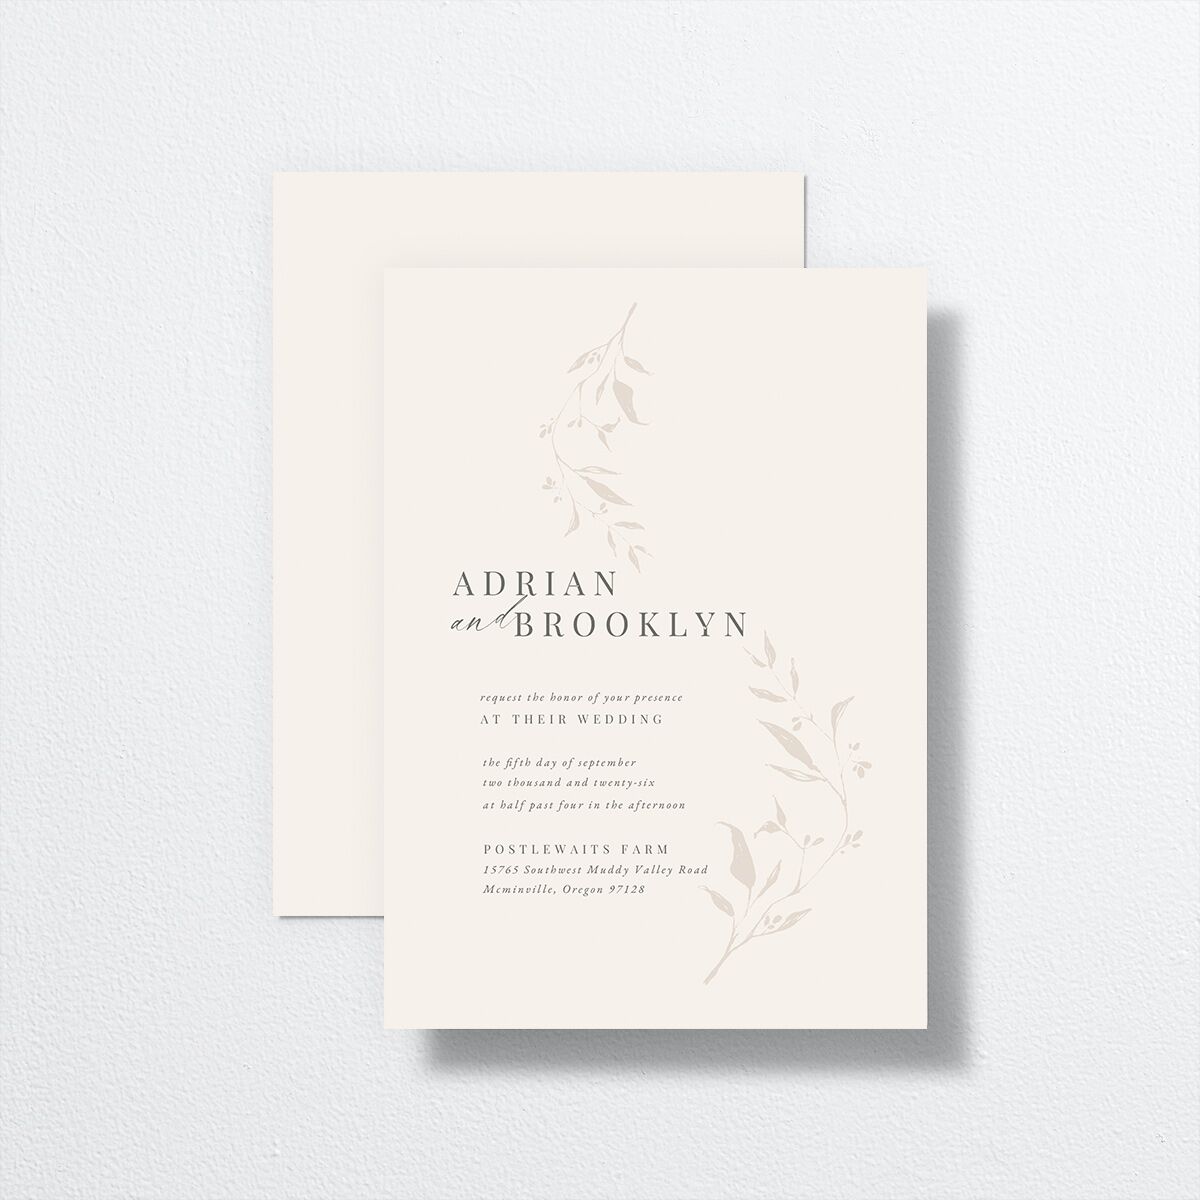 Rustic Minimal Wedding Invitations front-and-back